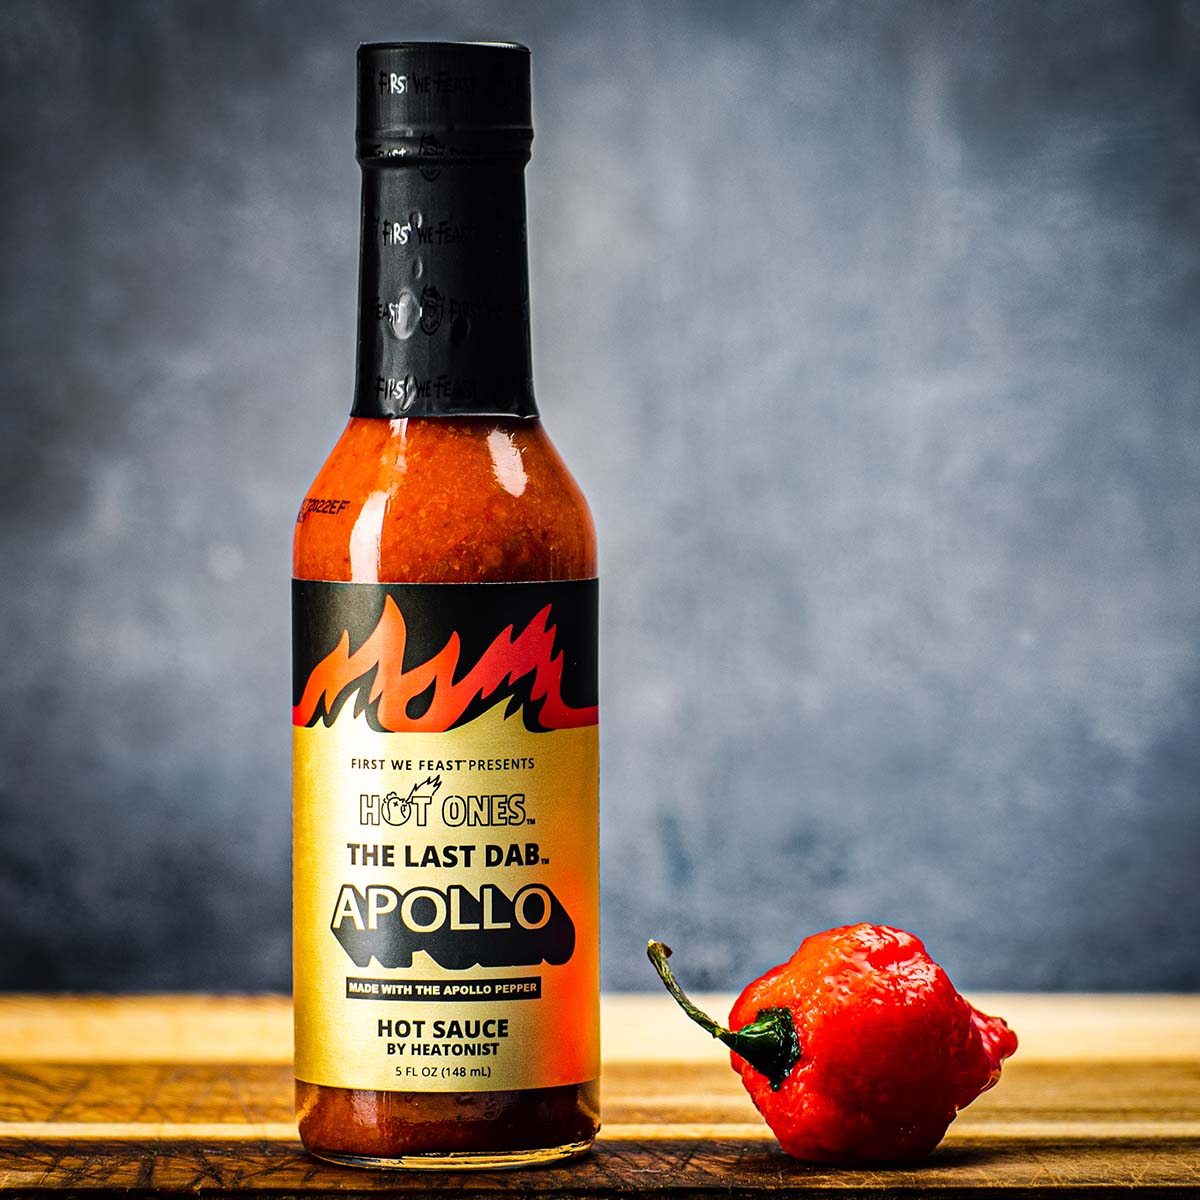 Hot Ones Hot Sauce Los Calientes Grill Pack